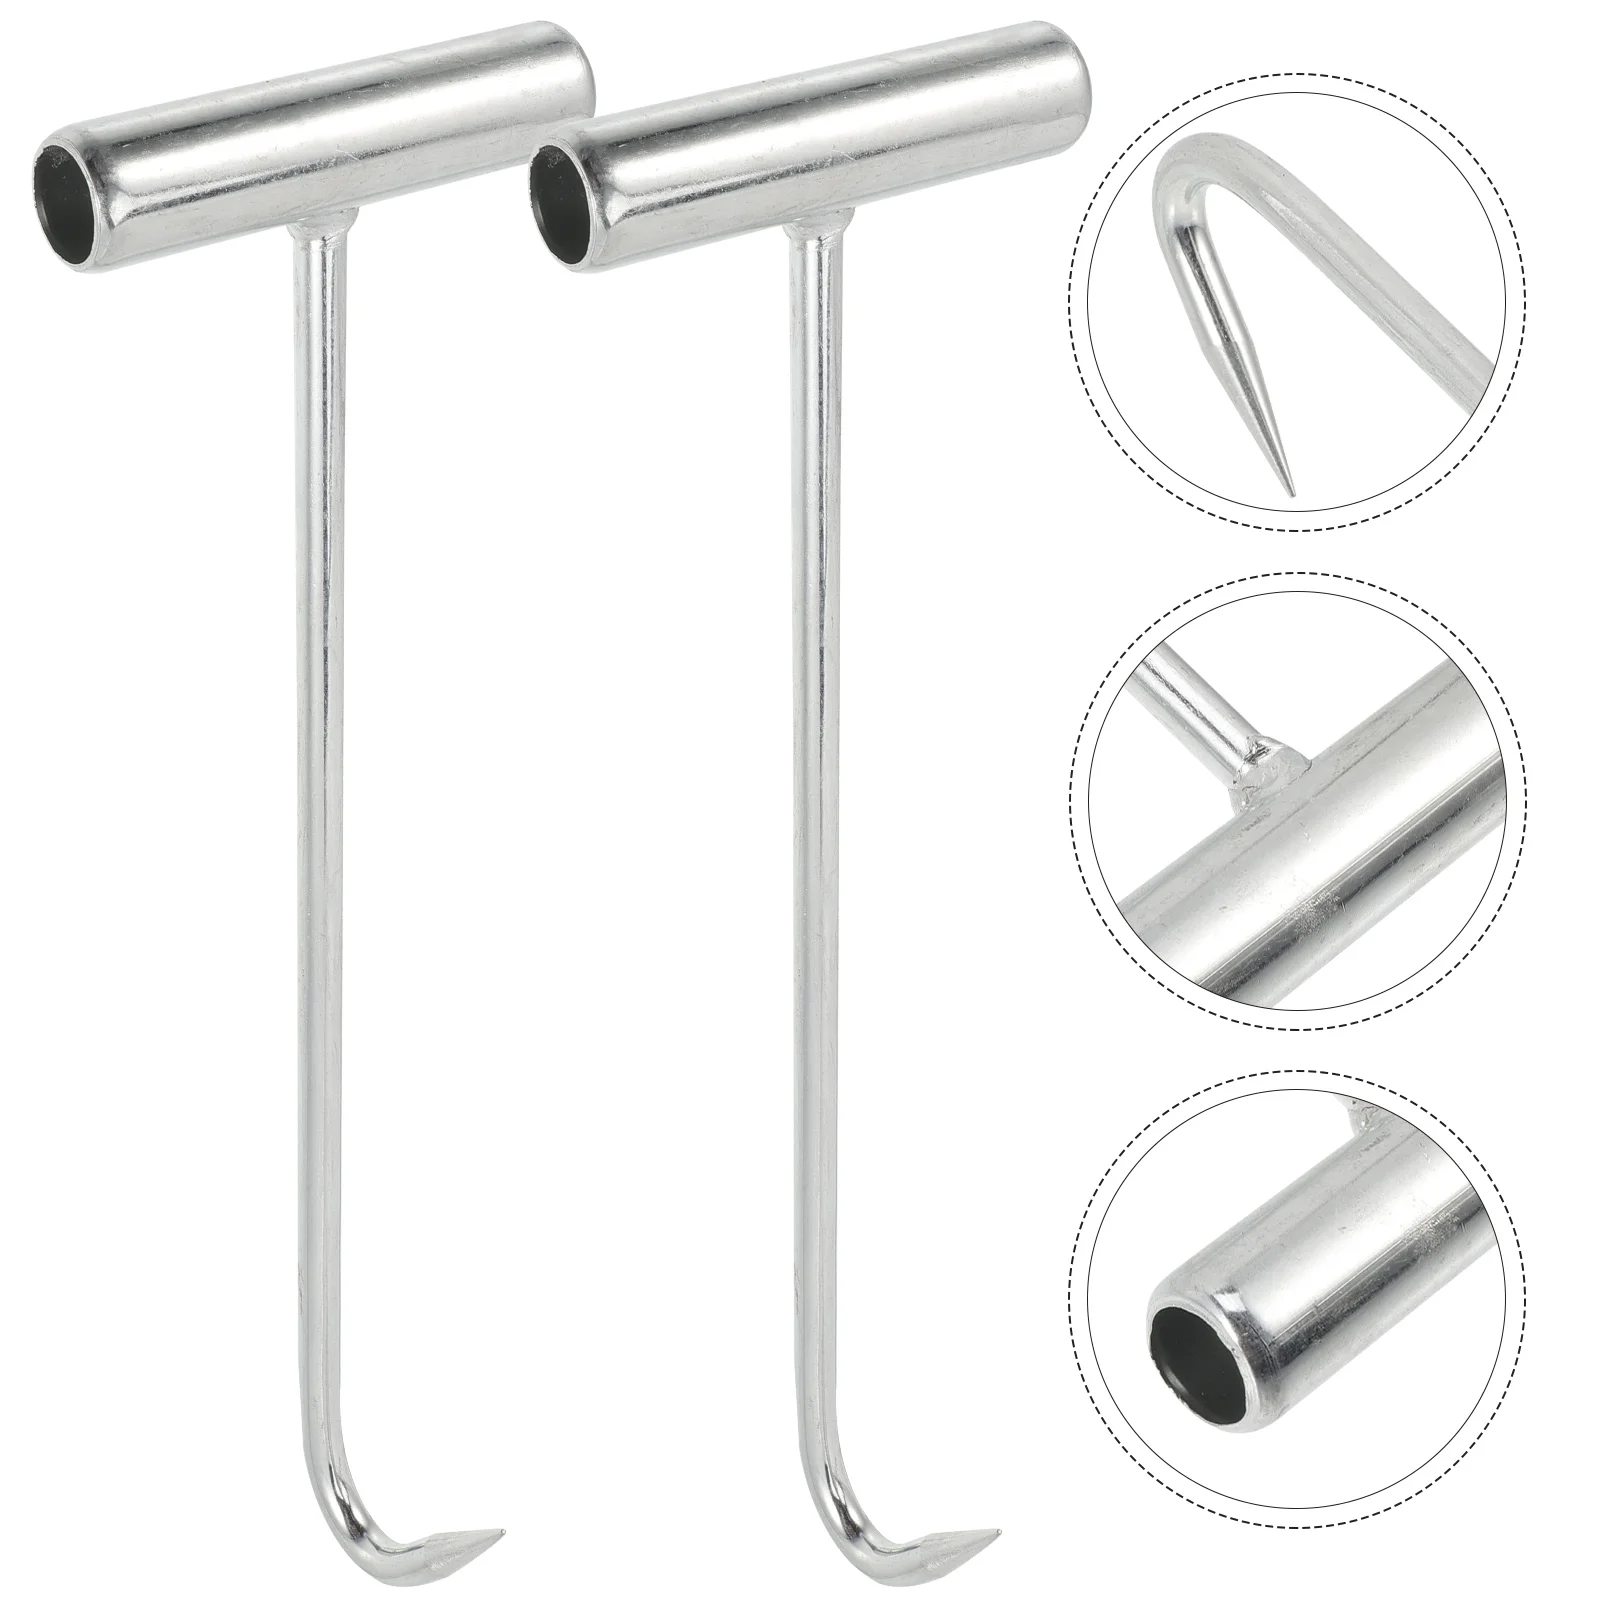 

2 Pcs Iron Manhole Hook Stainless Steel Hooks Heavy Lid Lifter Well Cover Door Lifting T-shape Sticky Hanging Duty